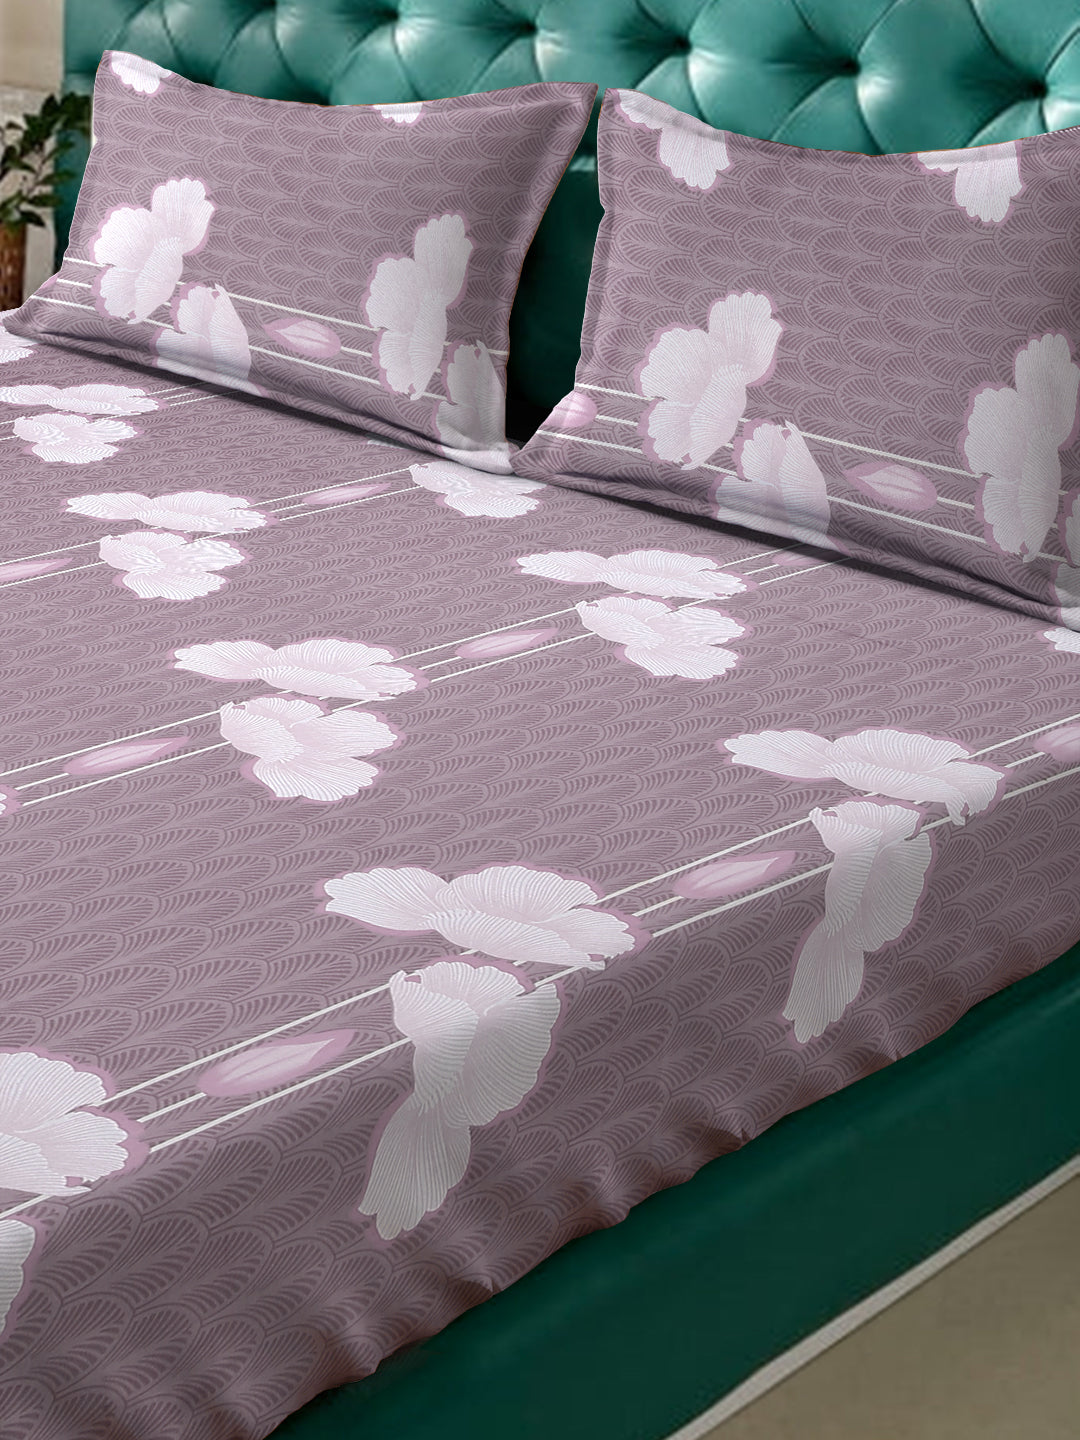 Klotthe Purple Floral 400 TC Pure Cotton Fitted Double Bedsheet with 2 Pillow Covers